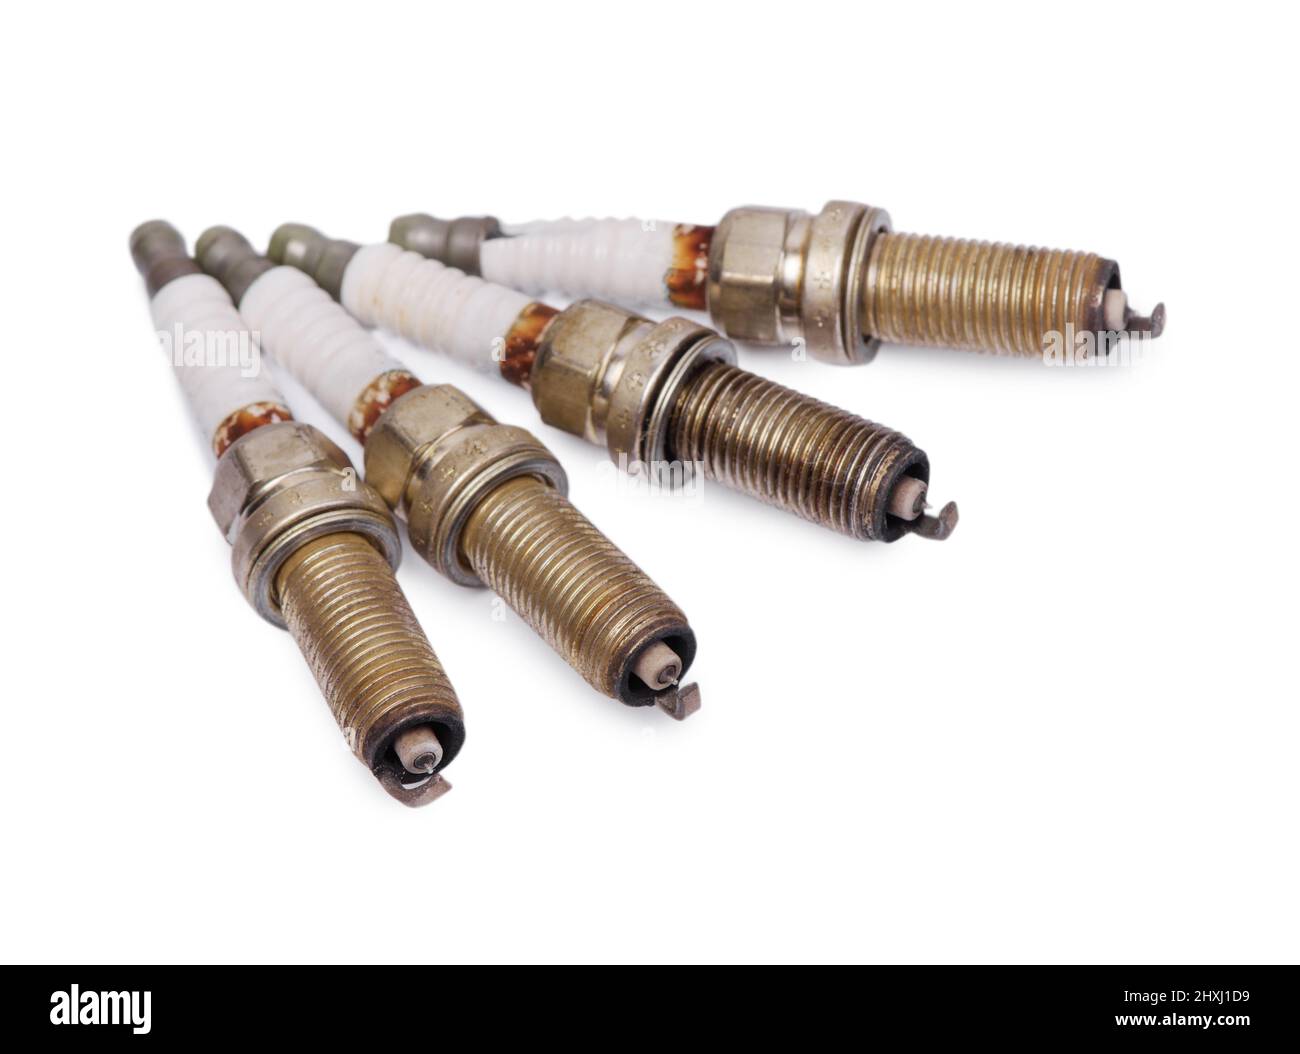 Four old used spark plugs isolated on white background Stock Photo